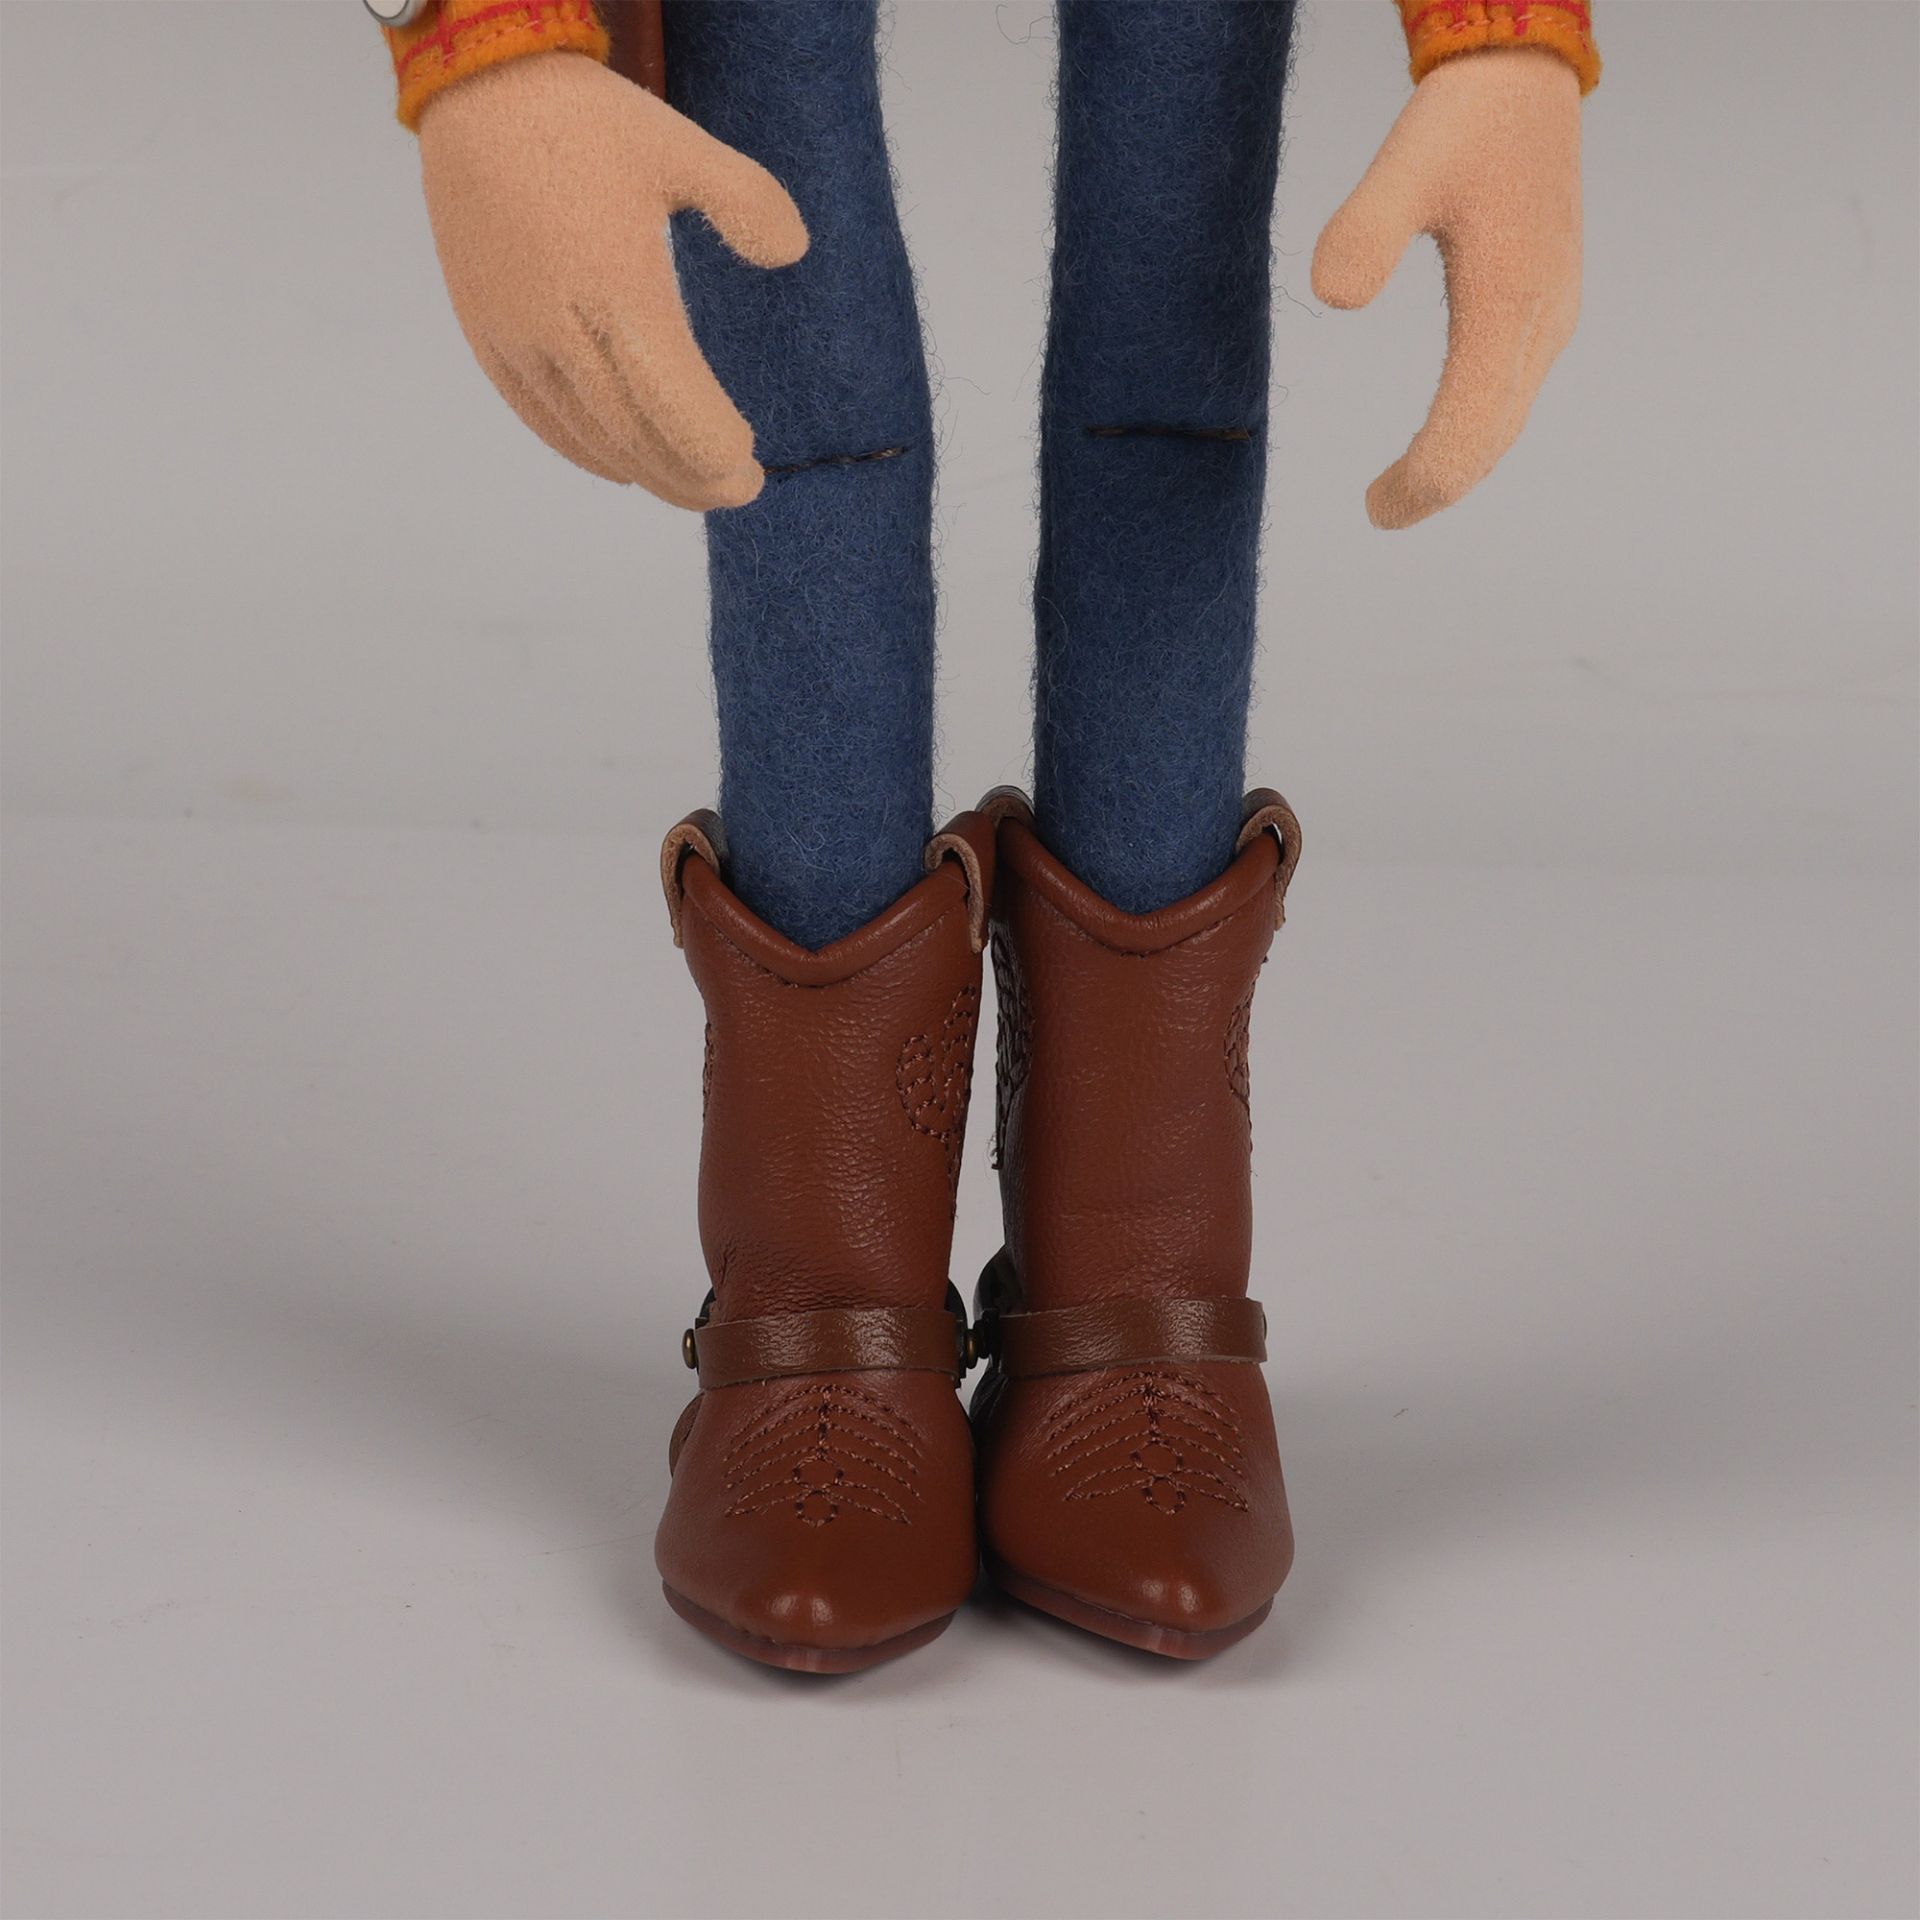 Steiff Character, Woody from Disney/Pixar's Toy Story - Image 7 of 12